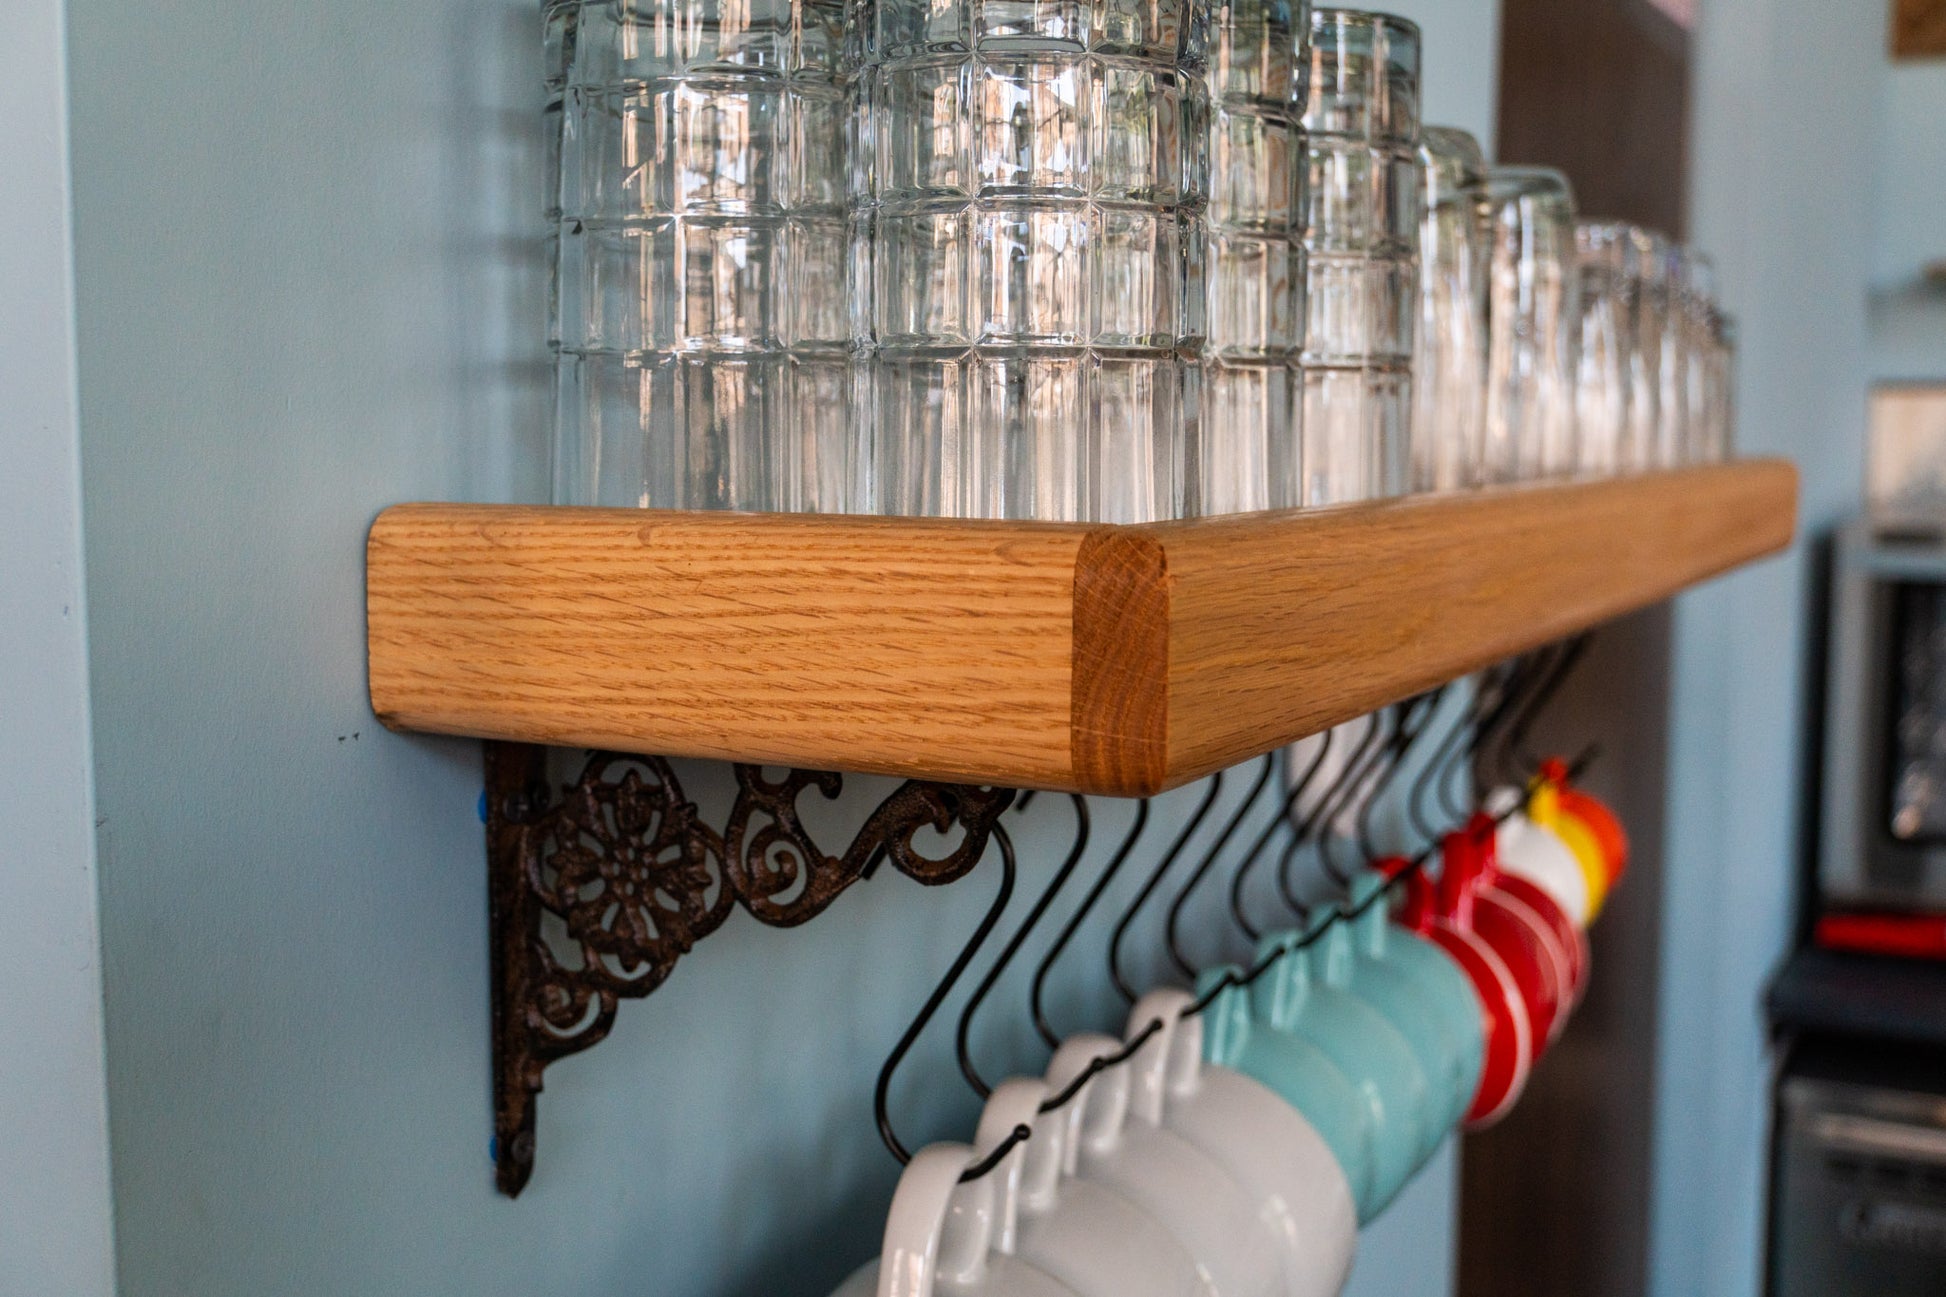 The side view of the Customizable Coffee Mug Shelf. The oak and mahogany wood shelf has an edge that rises upward creating a secure holding for stacked glasses. The cast iron bracket features a whirling design and a variety of black metal hooks hang below the shelf holding white, blue, red, yellow, and orange coffee cups. 